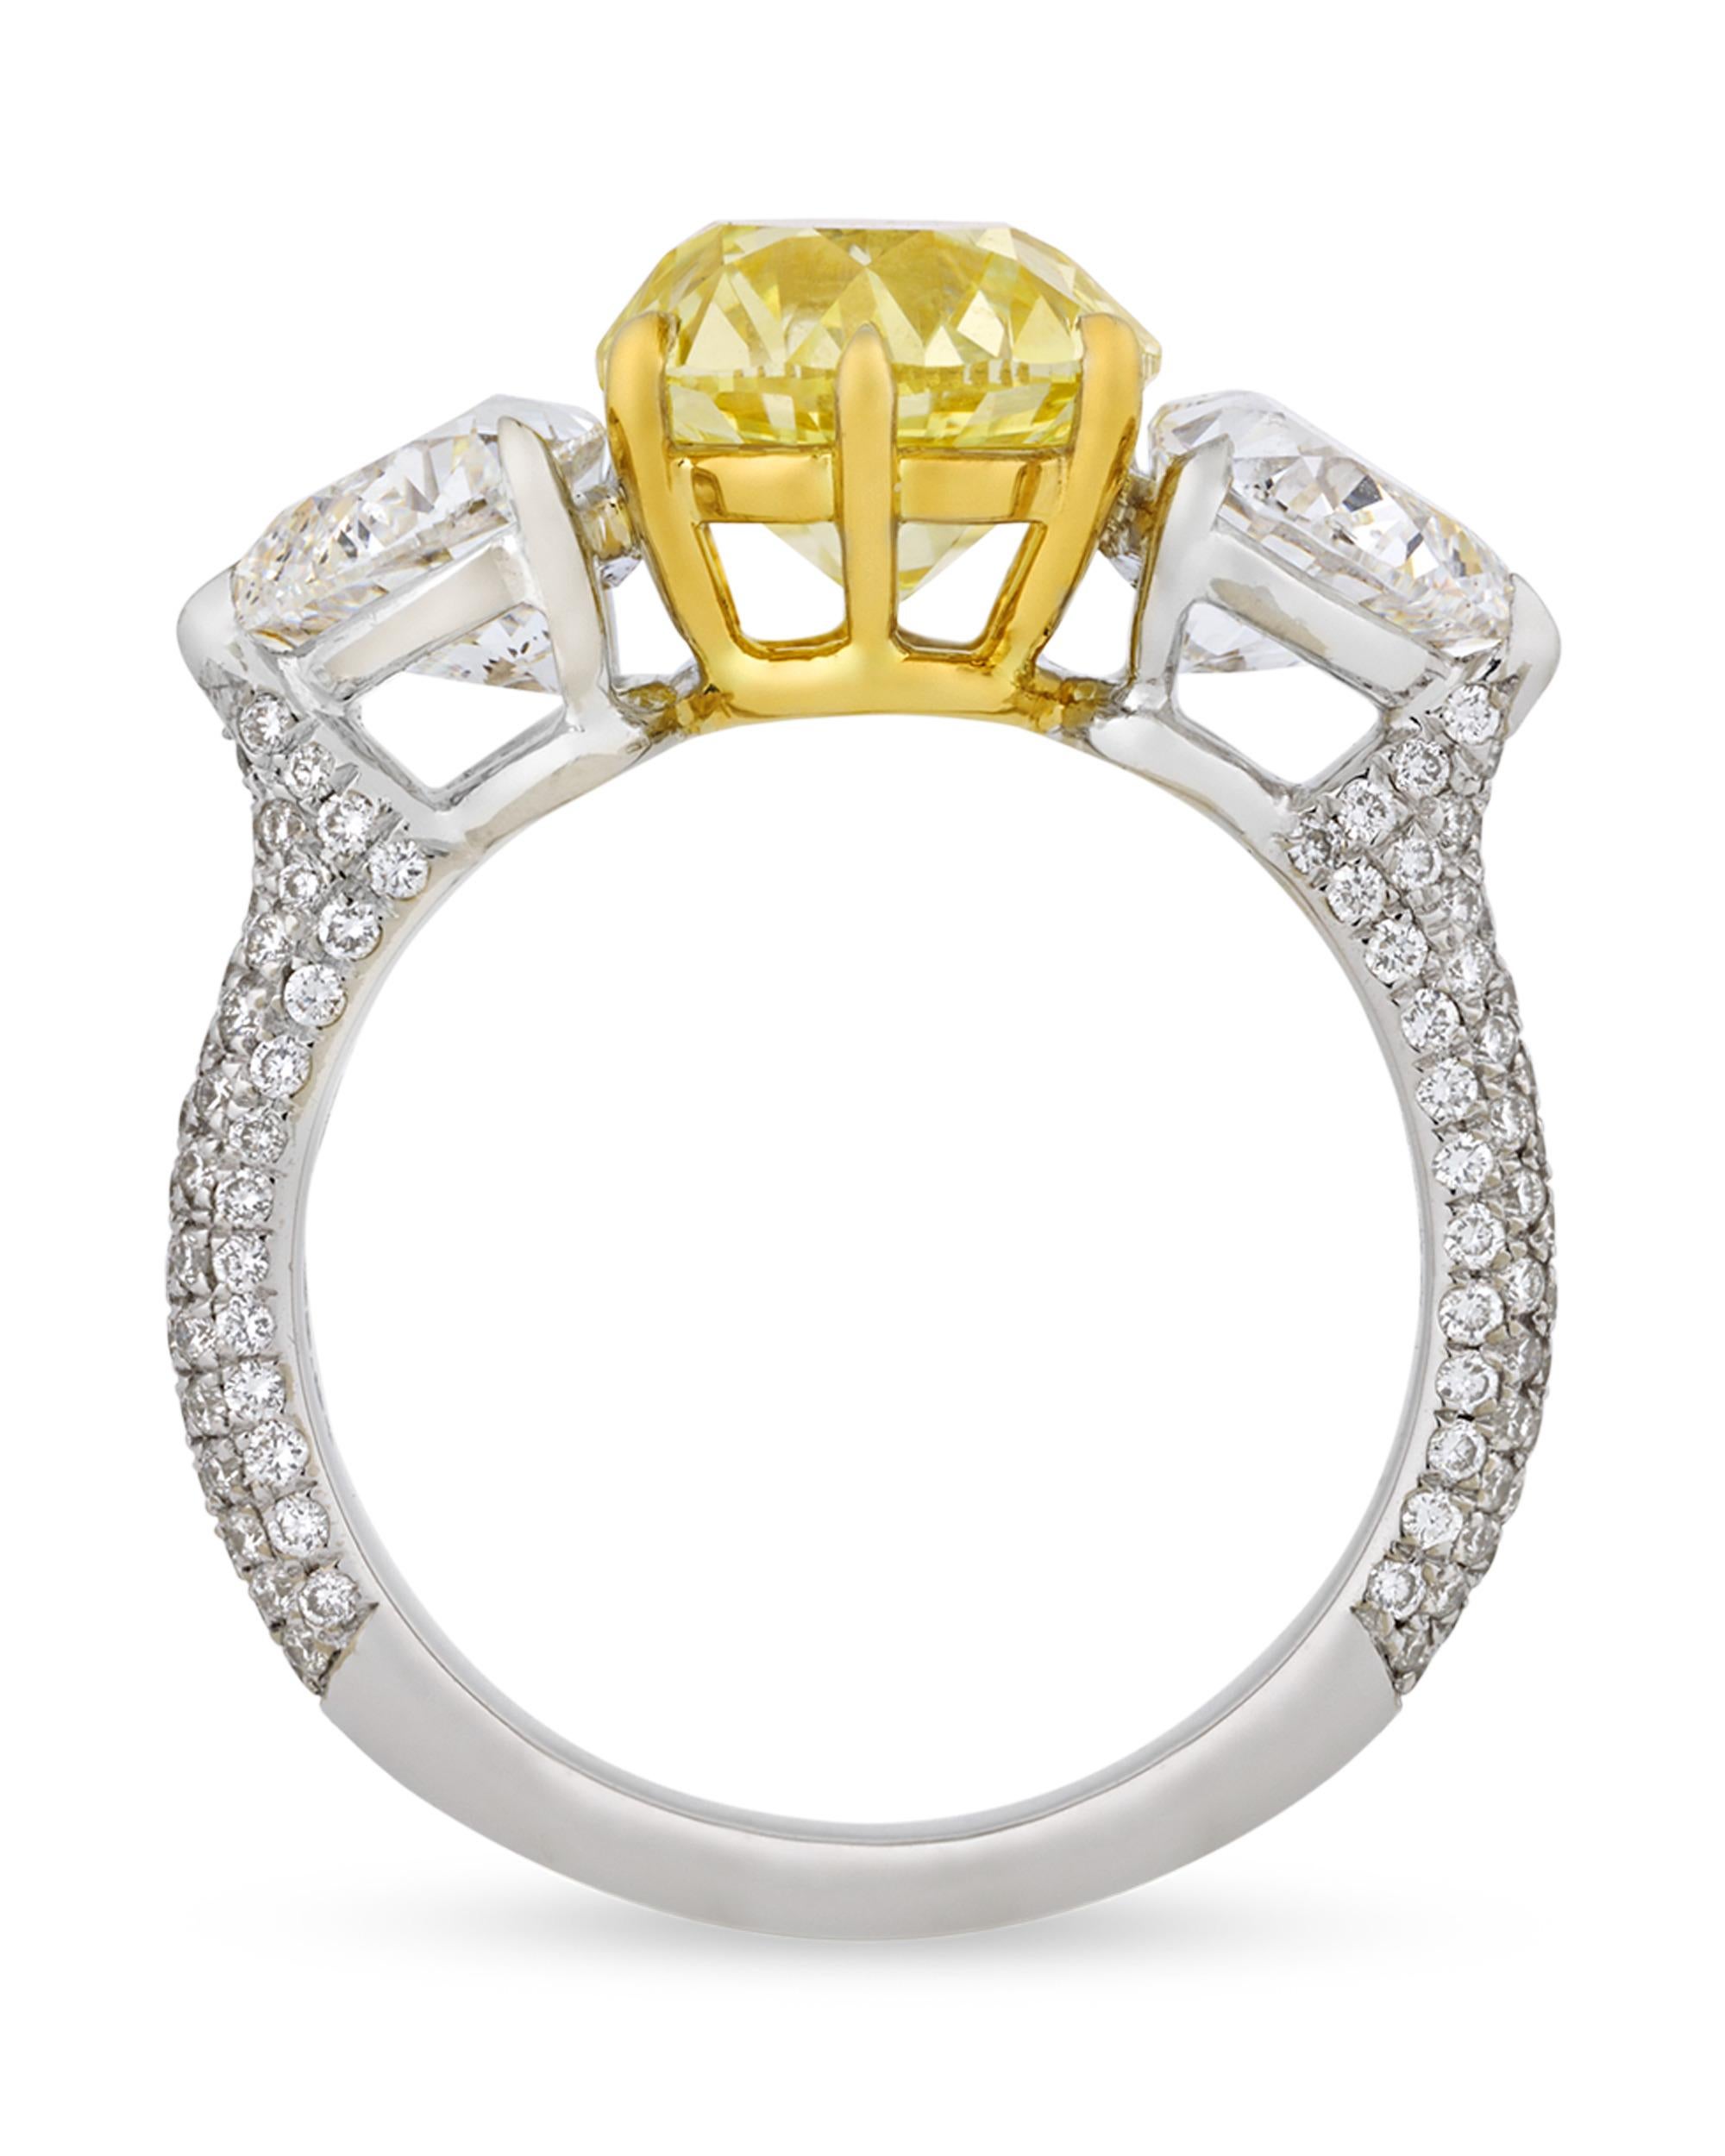 Featuring a captivating sunshiny hue, this ring showcases a glittering Old European-cut yellow diamond weighing 2.59 carats. The diamond is certified by the Gemological Institute of America as displaying VS1 clarity and possessing a coveted